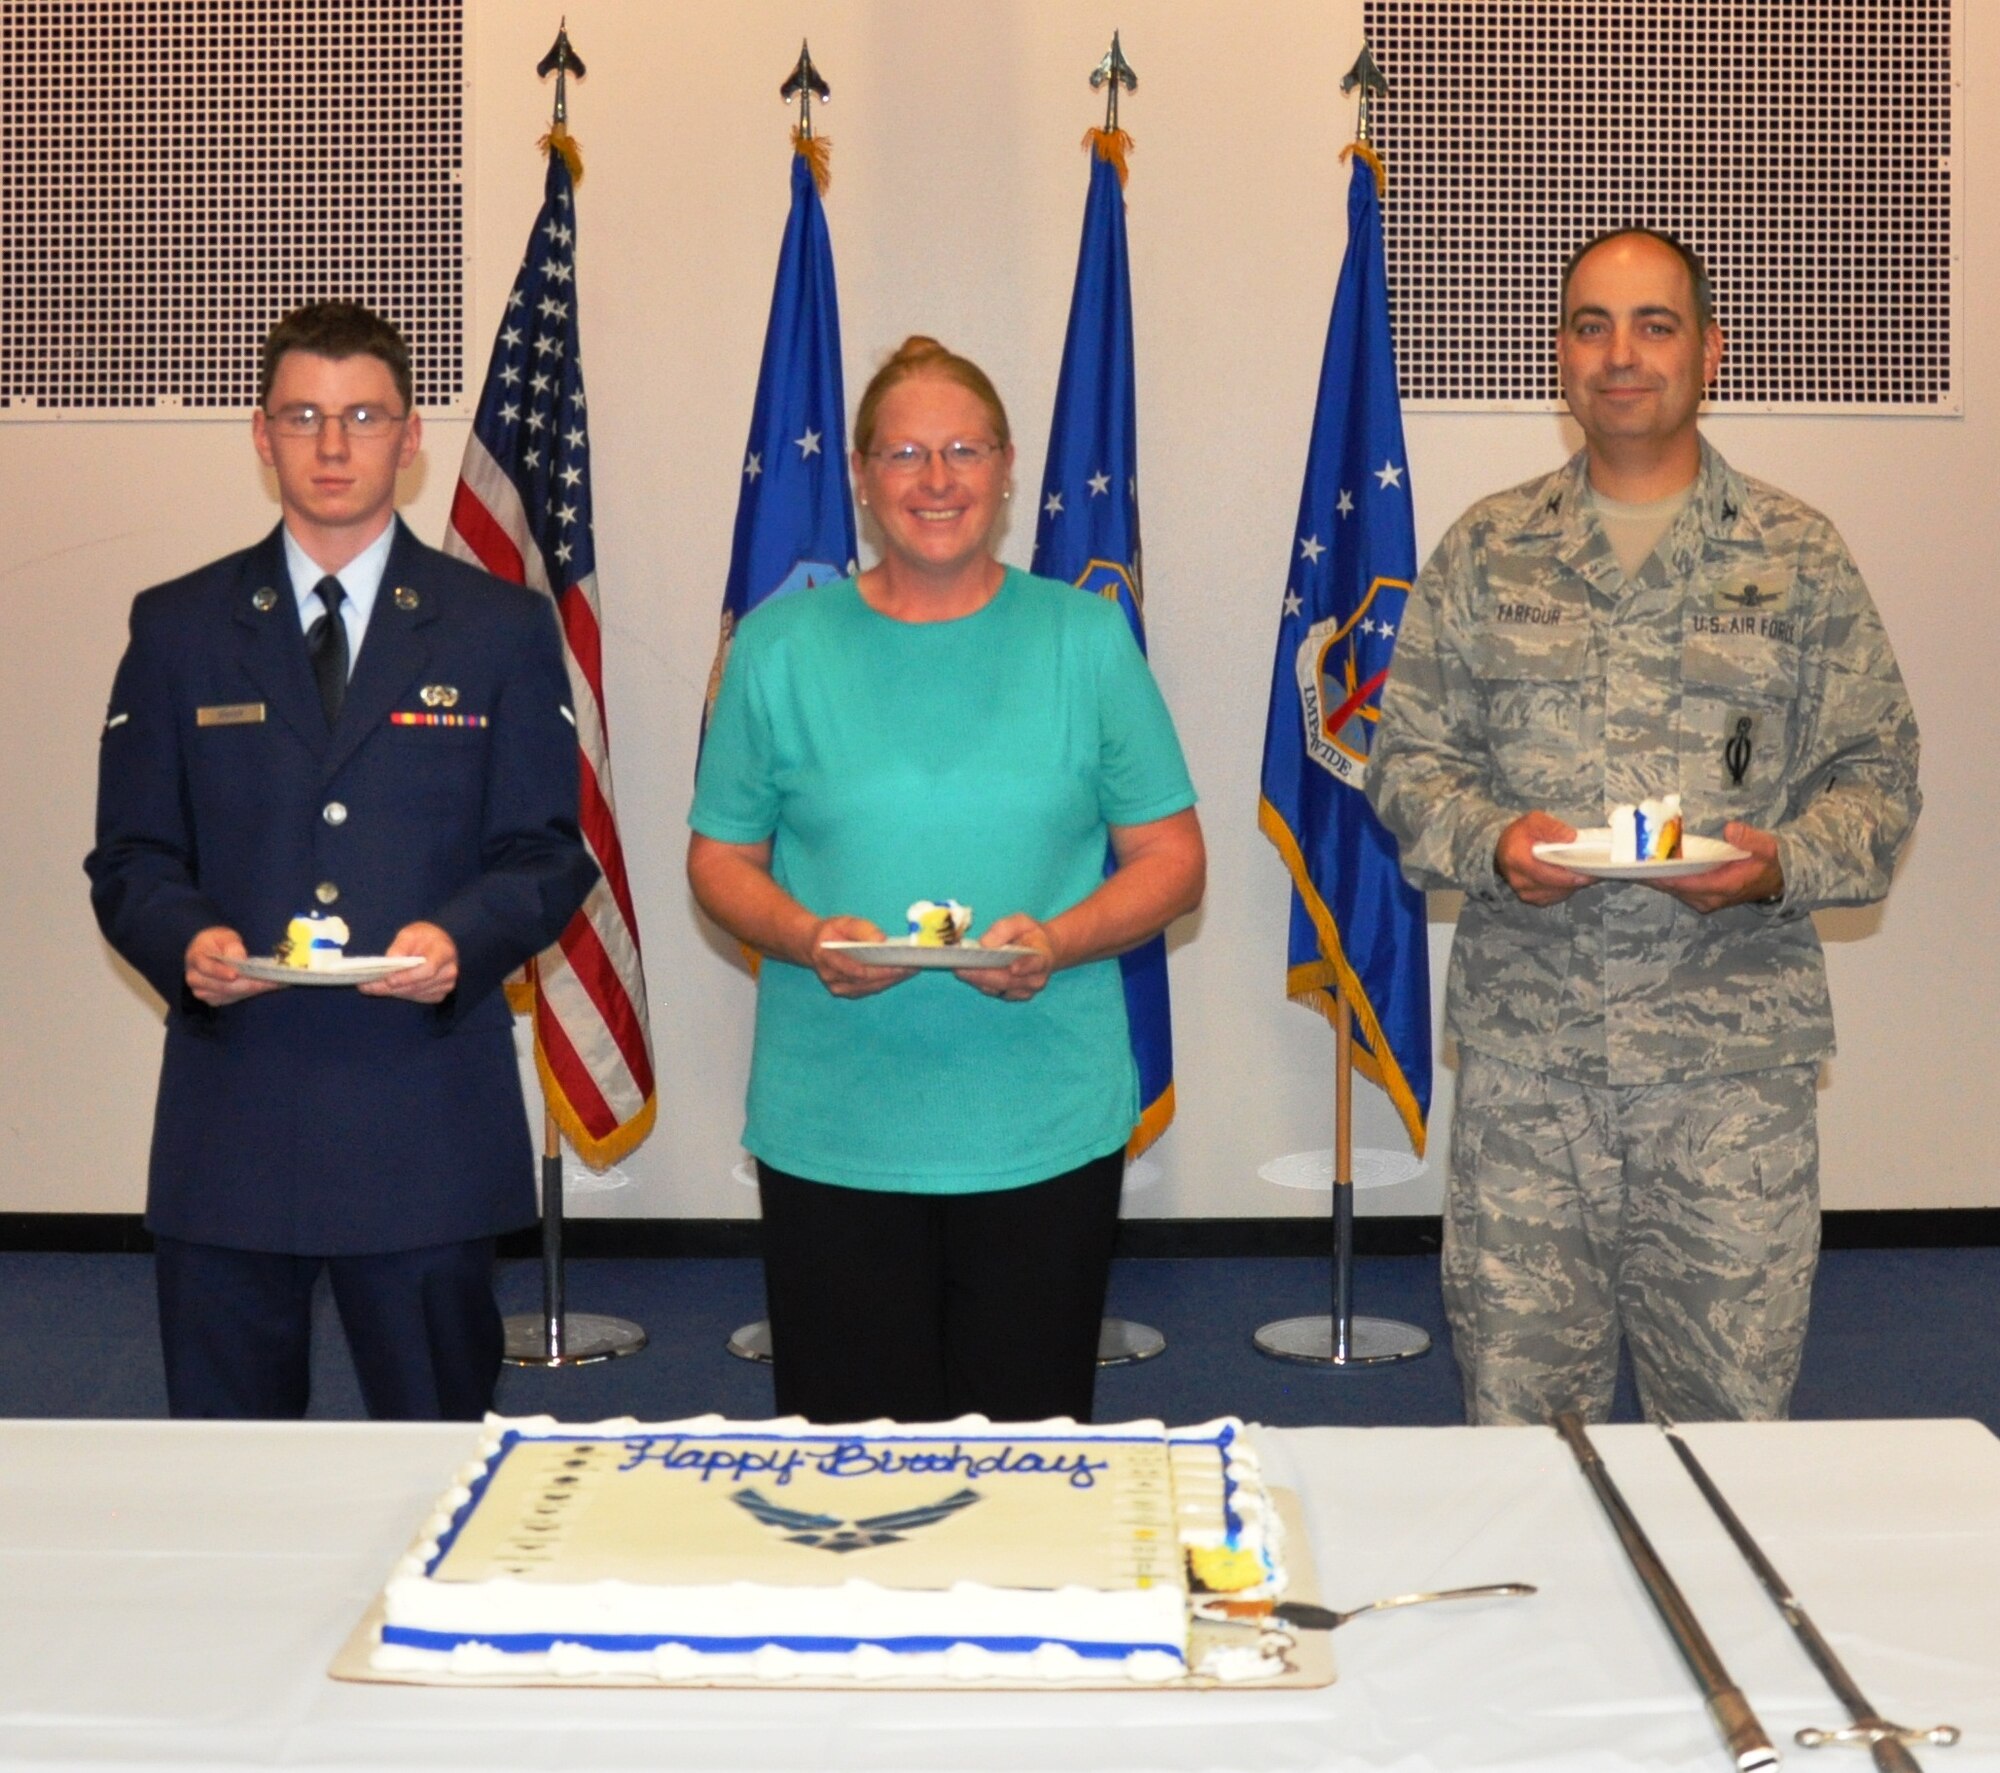 Col. George Farfour, 90th Missile Wing vice commander, Ms. Elaine Hart, 90th Missile Wing Legal Office, and Amn John Baker, 90th Communications Squadron, pose with their pieces of the Air Force Birthday Cake during a celebration commemorating the 65th Air Force Birthday, Sept. 17, at the Fall Hall Community Center on F. E. Warren Air Force Base, Wyo. (U.S. Air Force photo/Staff Sgt. Torri Savarese)